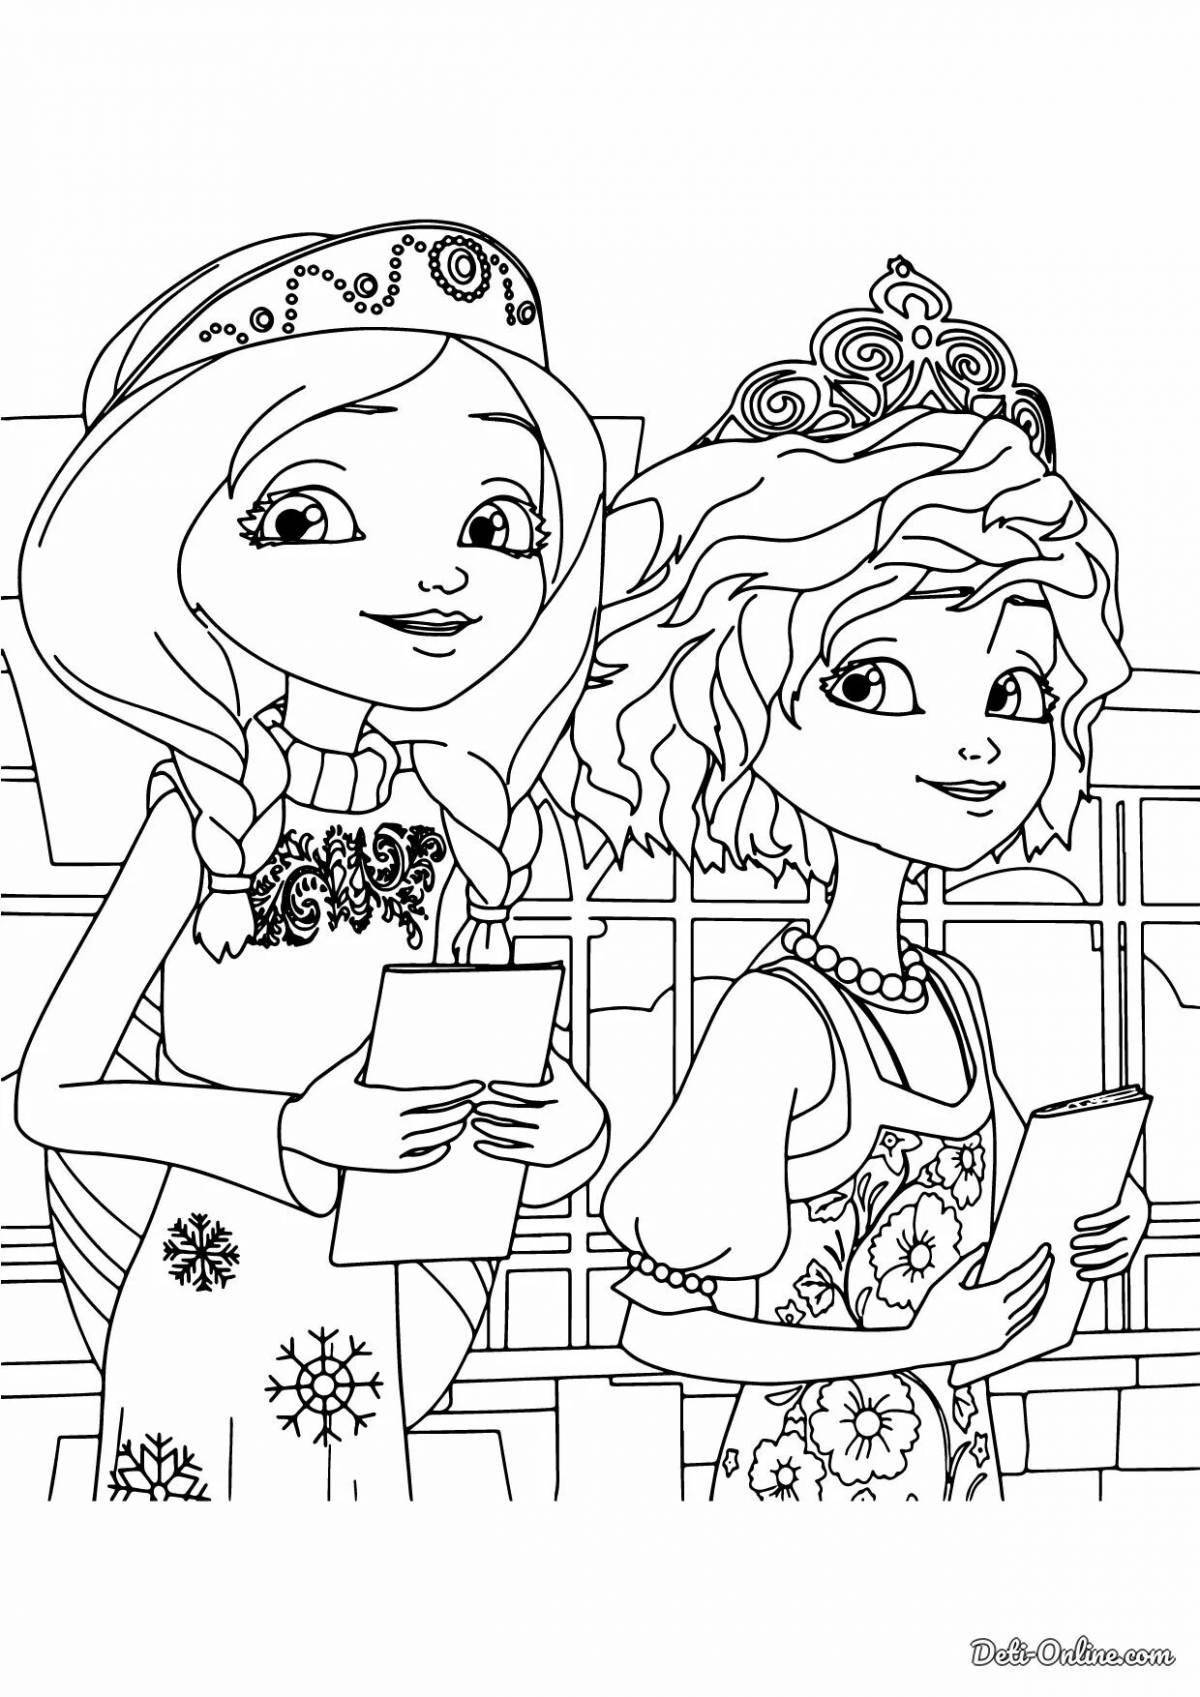 Whimsical cartoon coloring book for girls 6-7 years old